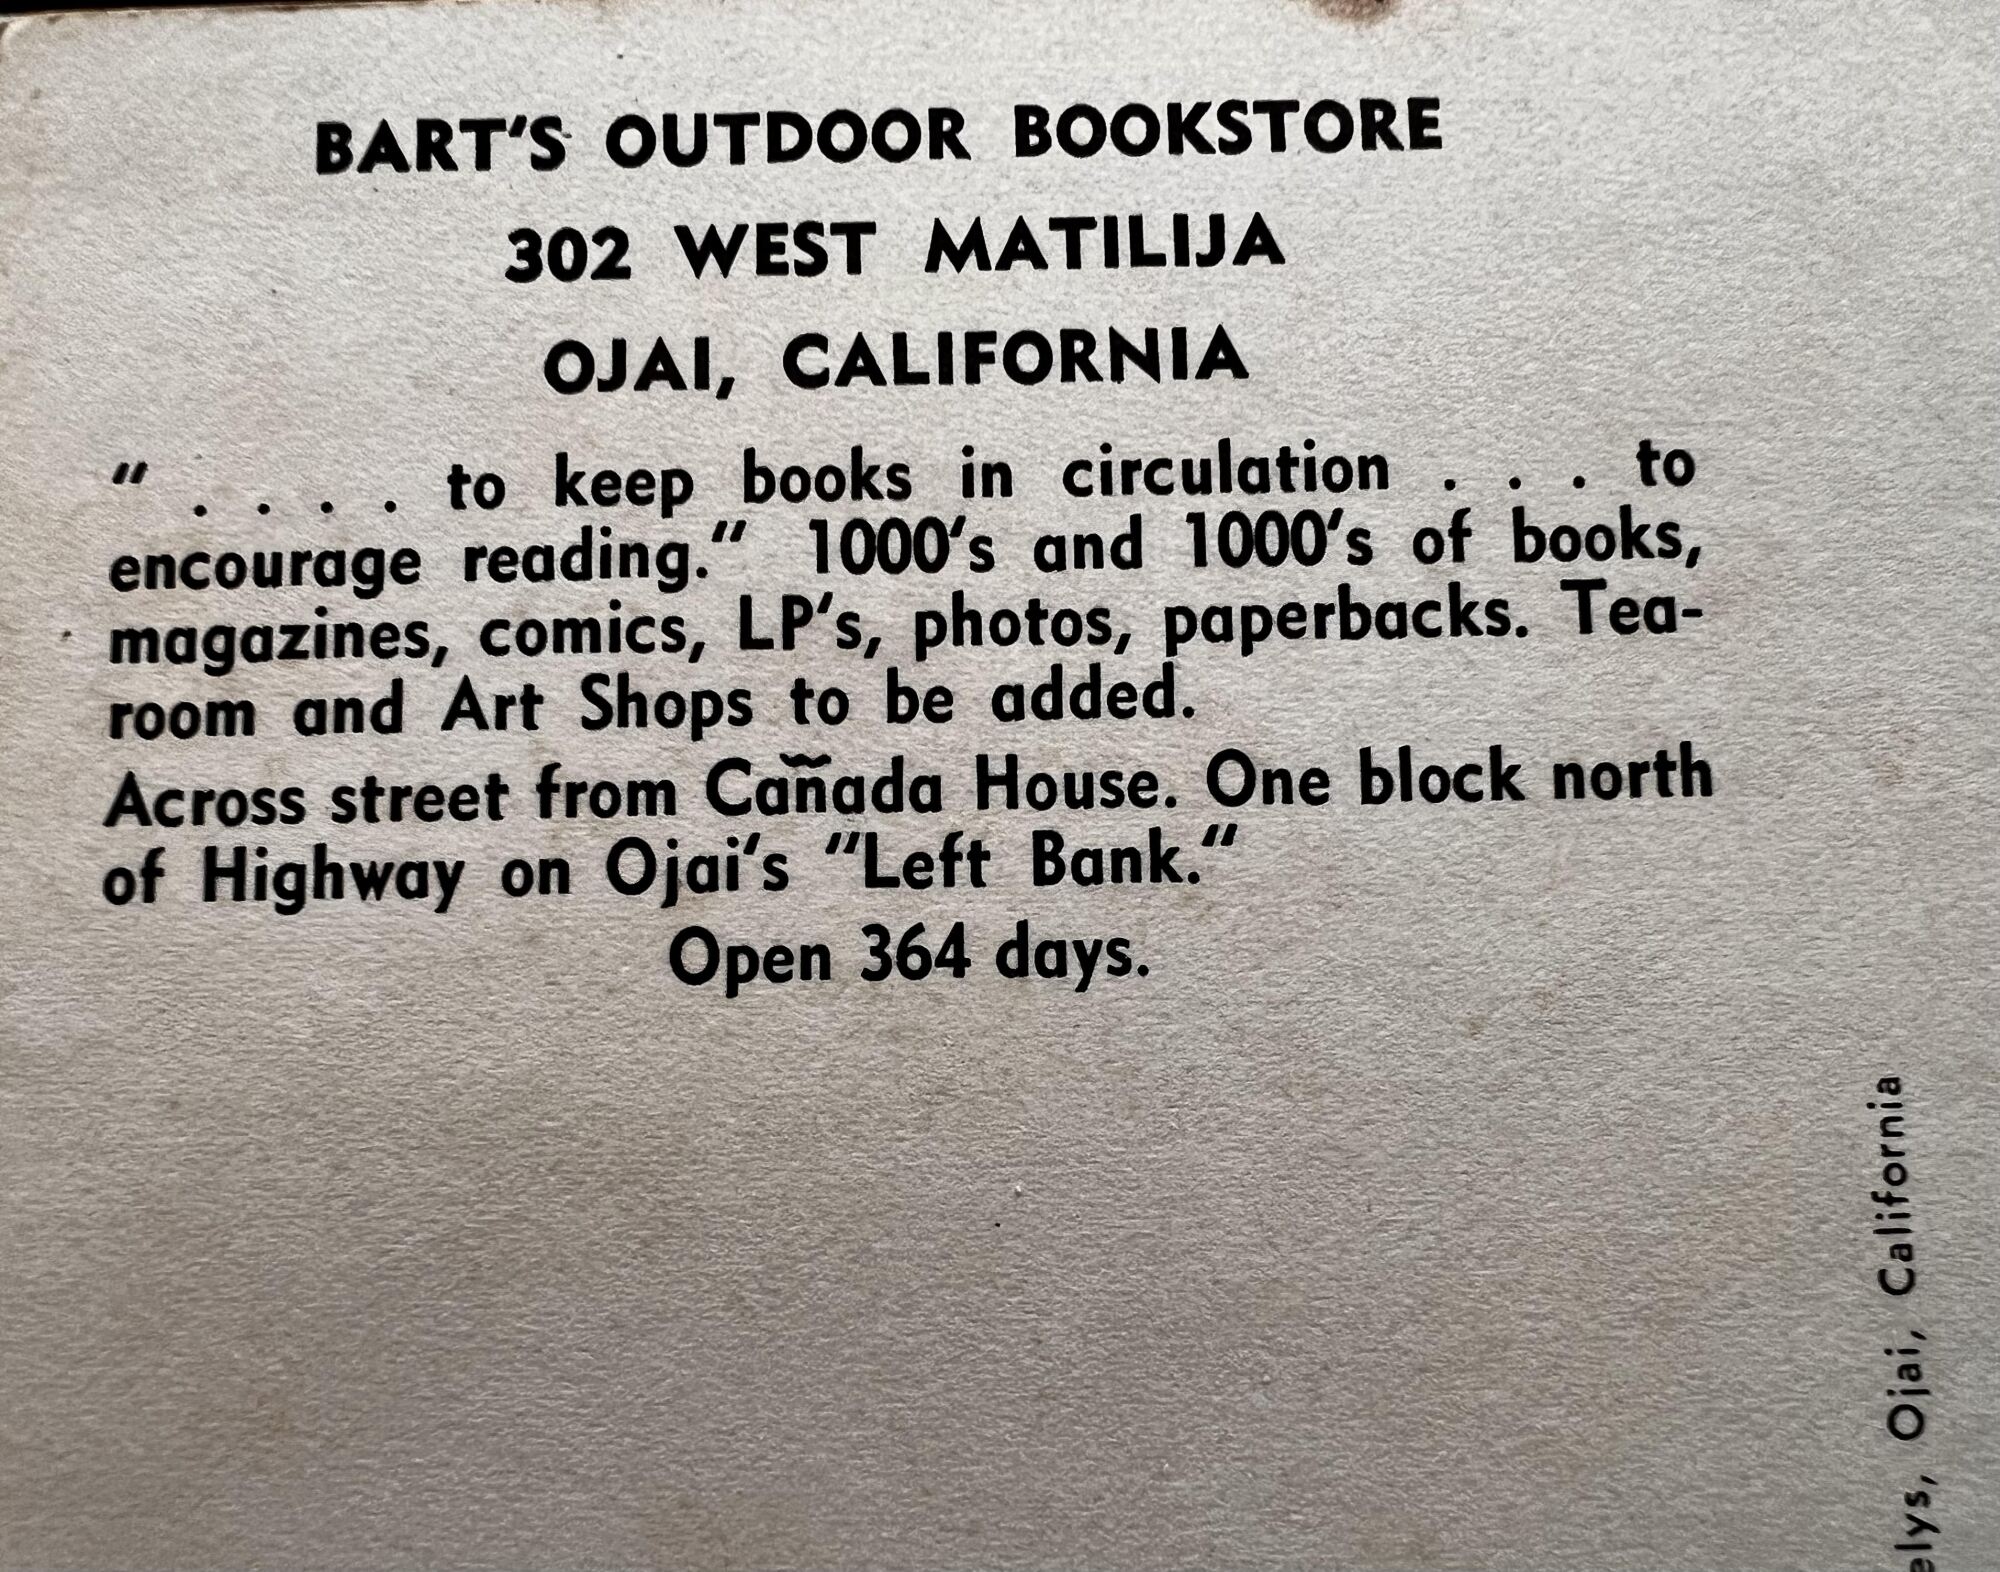 Back of a postcard, which includes the text: Bart's Outdoor Bookstore ... One block north of Highway on Ojai's 'Left Bank.'